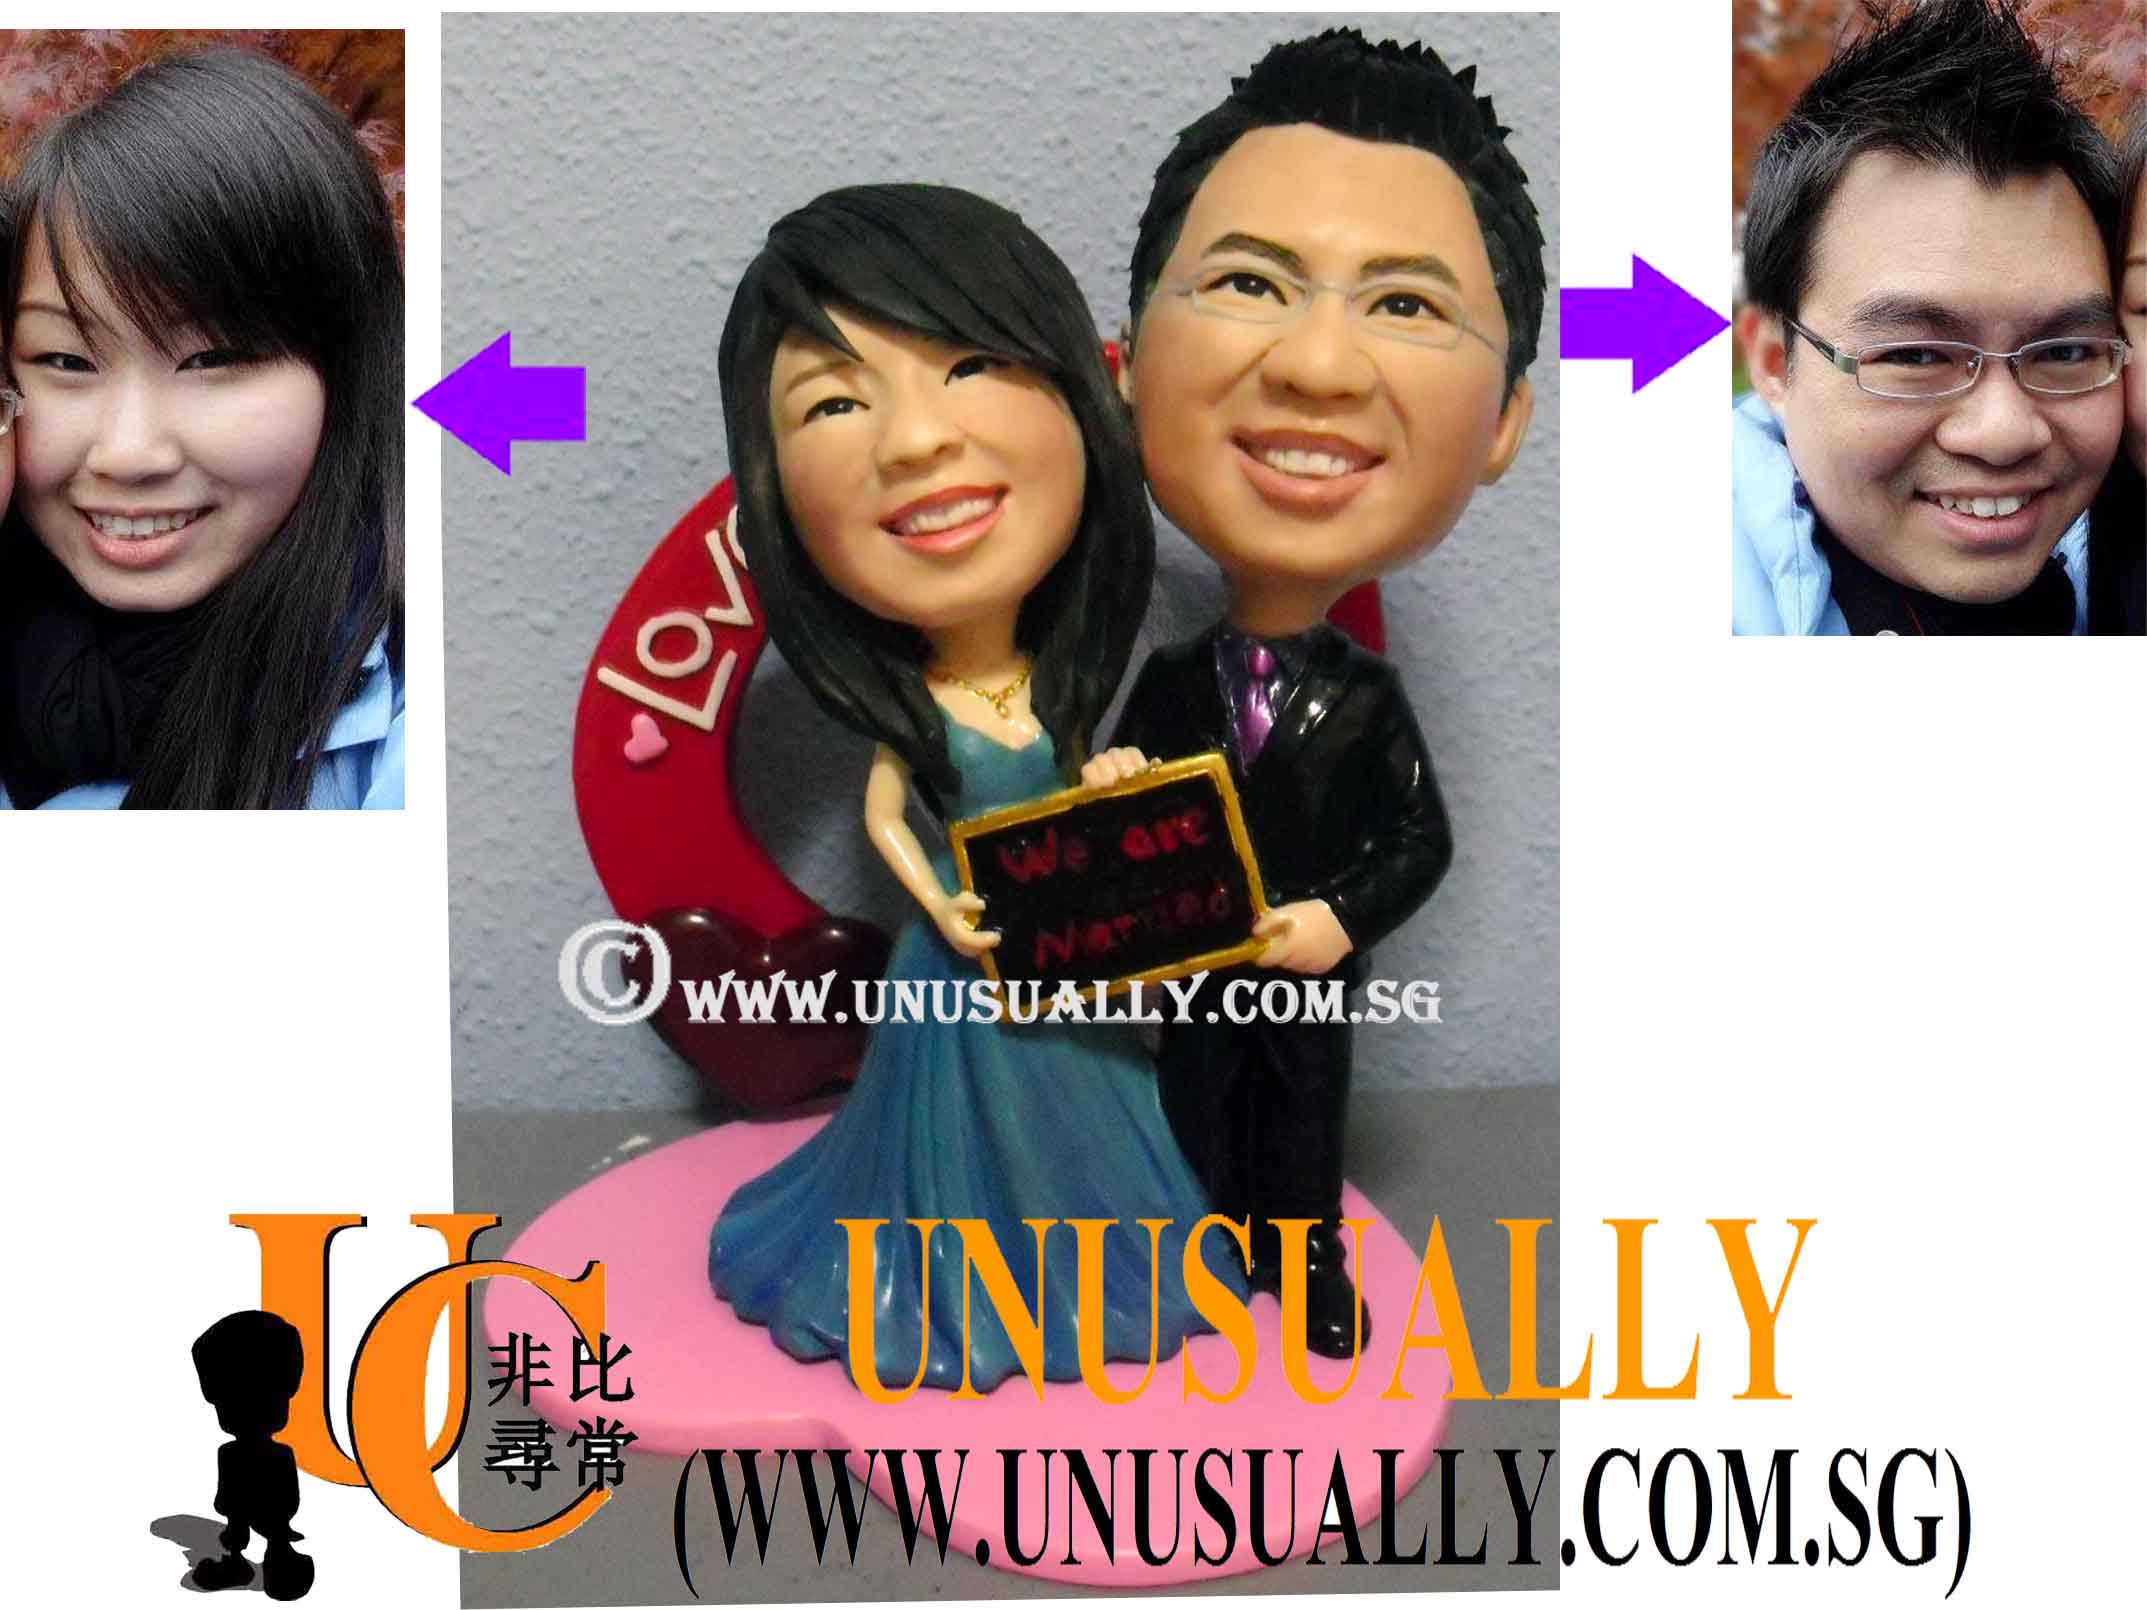 Custom 3D Newly Wed Lovely Couple Figurines